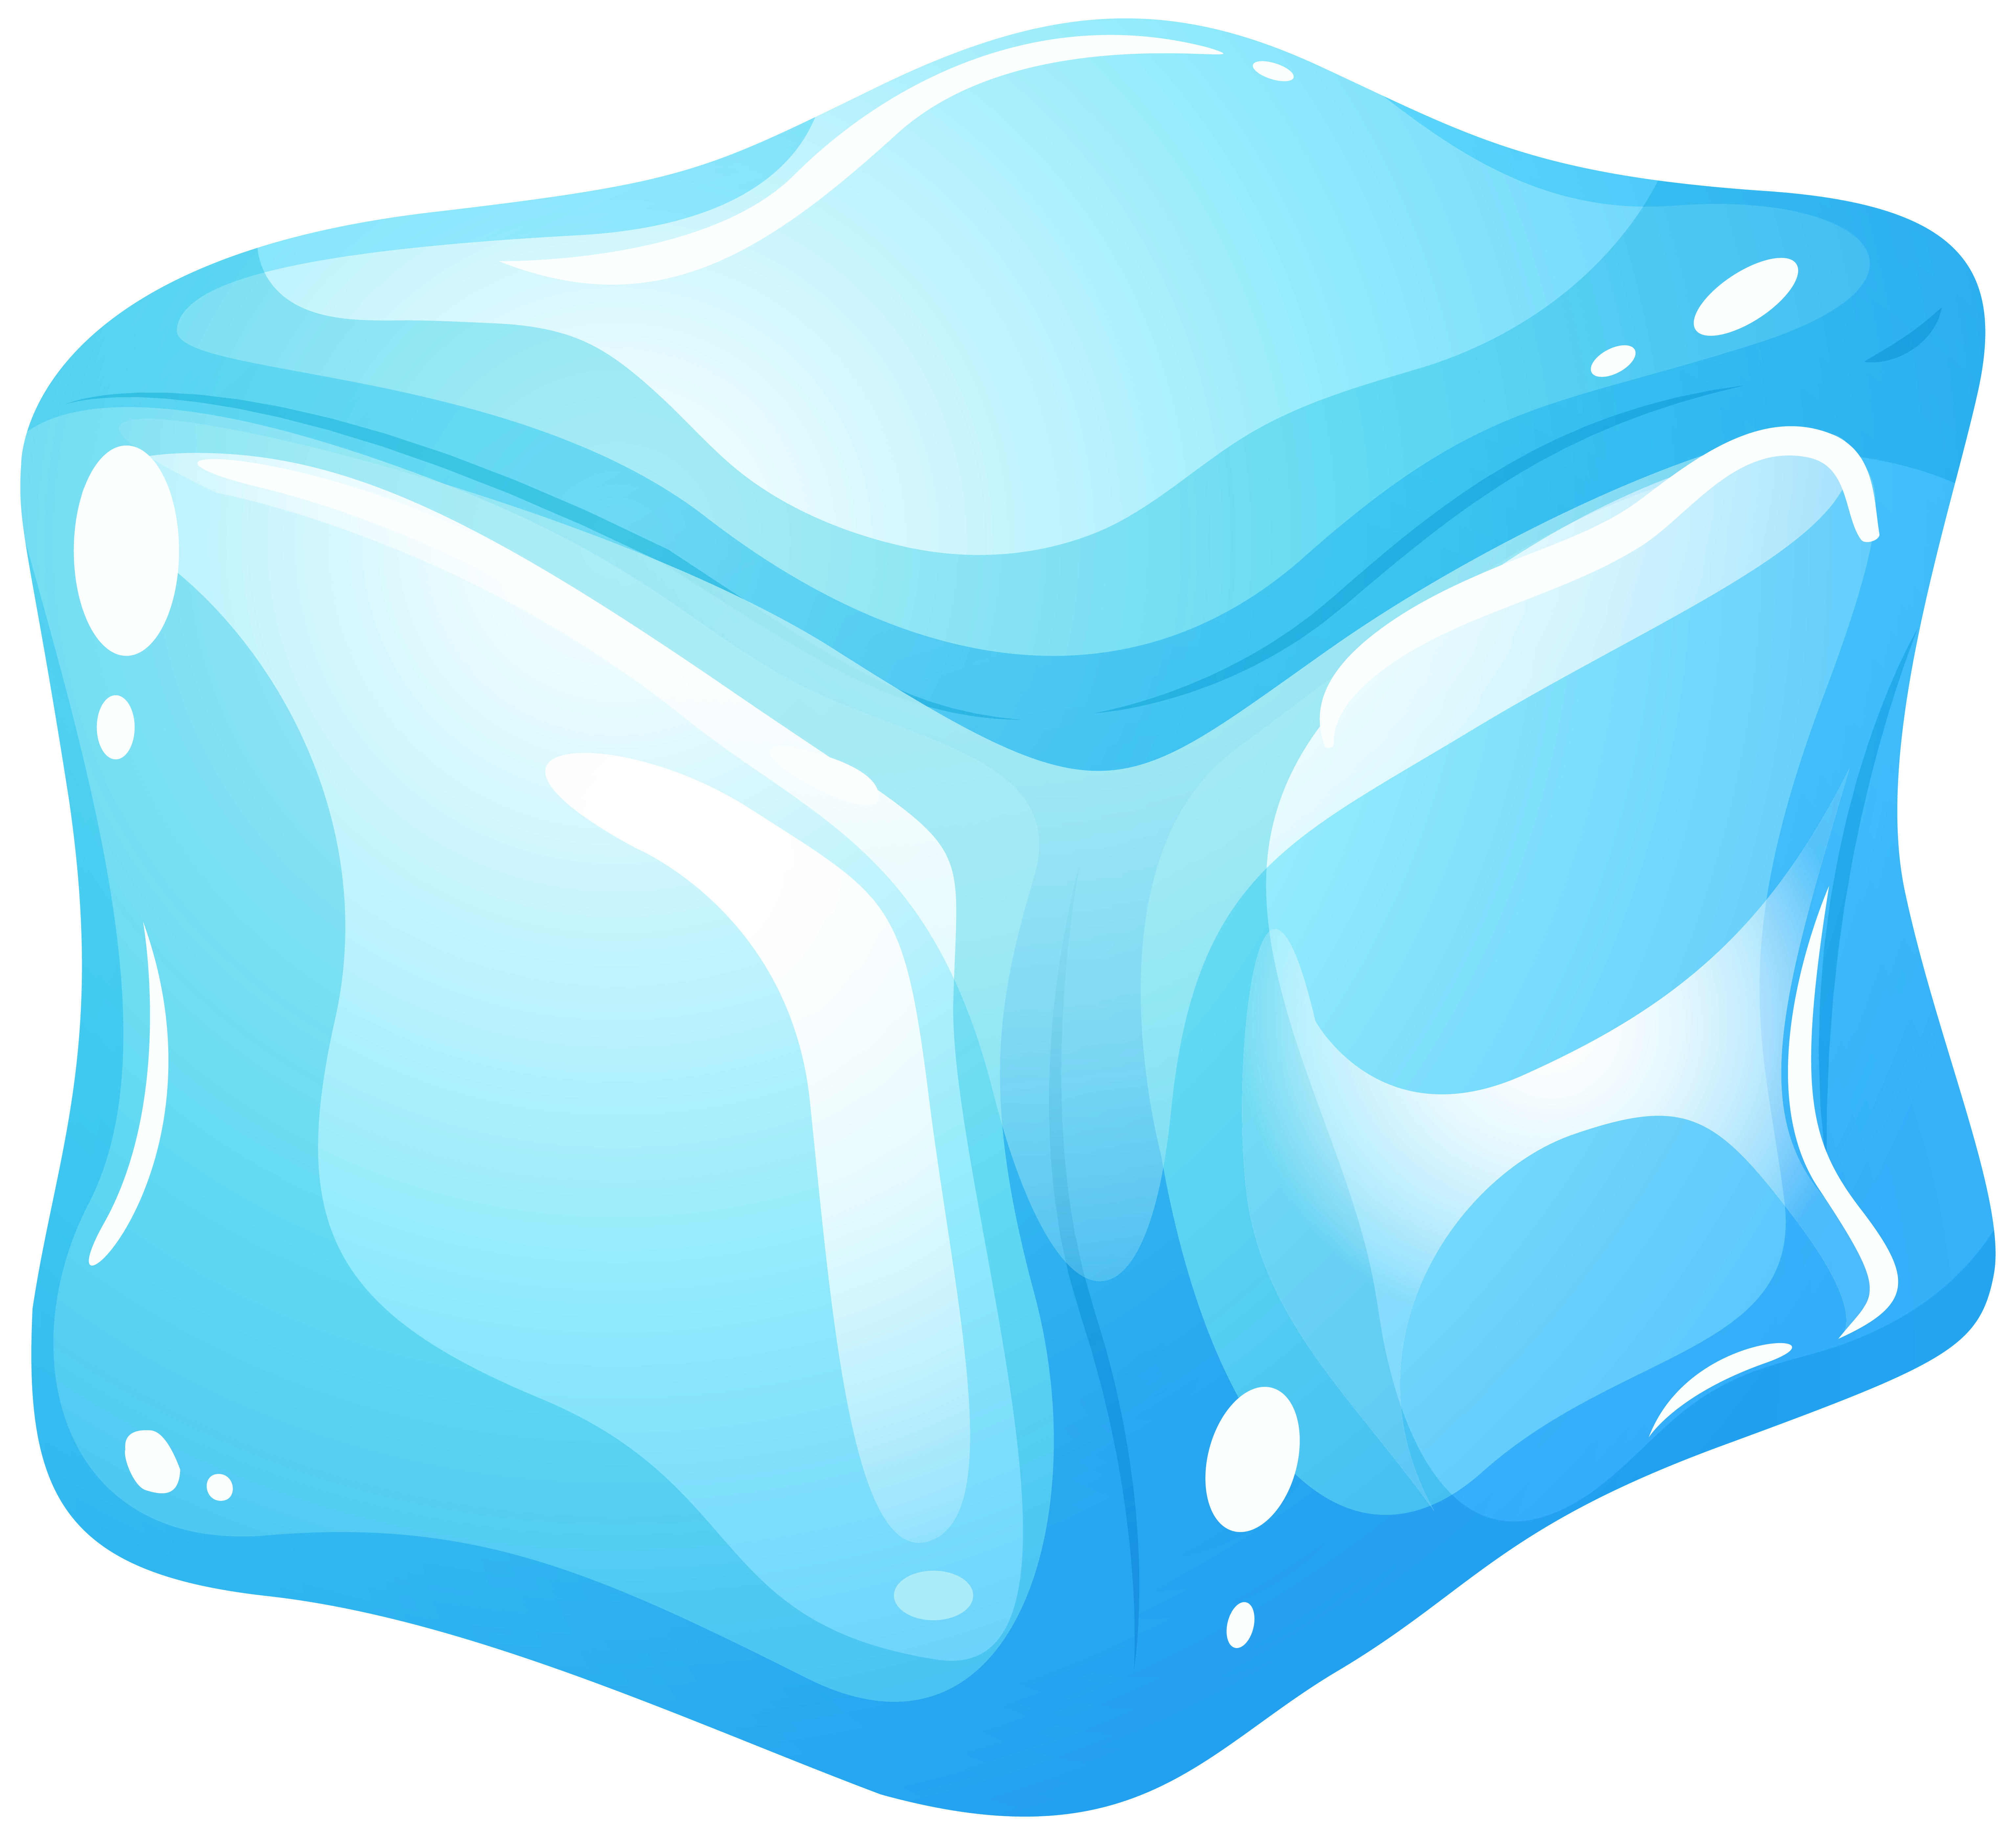 Free Ice Cube Clip Art Download Free Ice Cube Clip Art Png Images Free Cliparts On Clipart Library